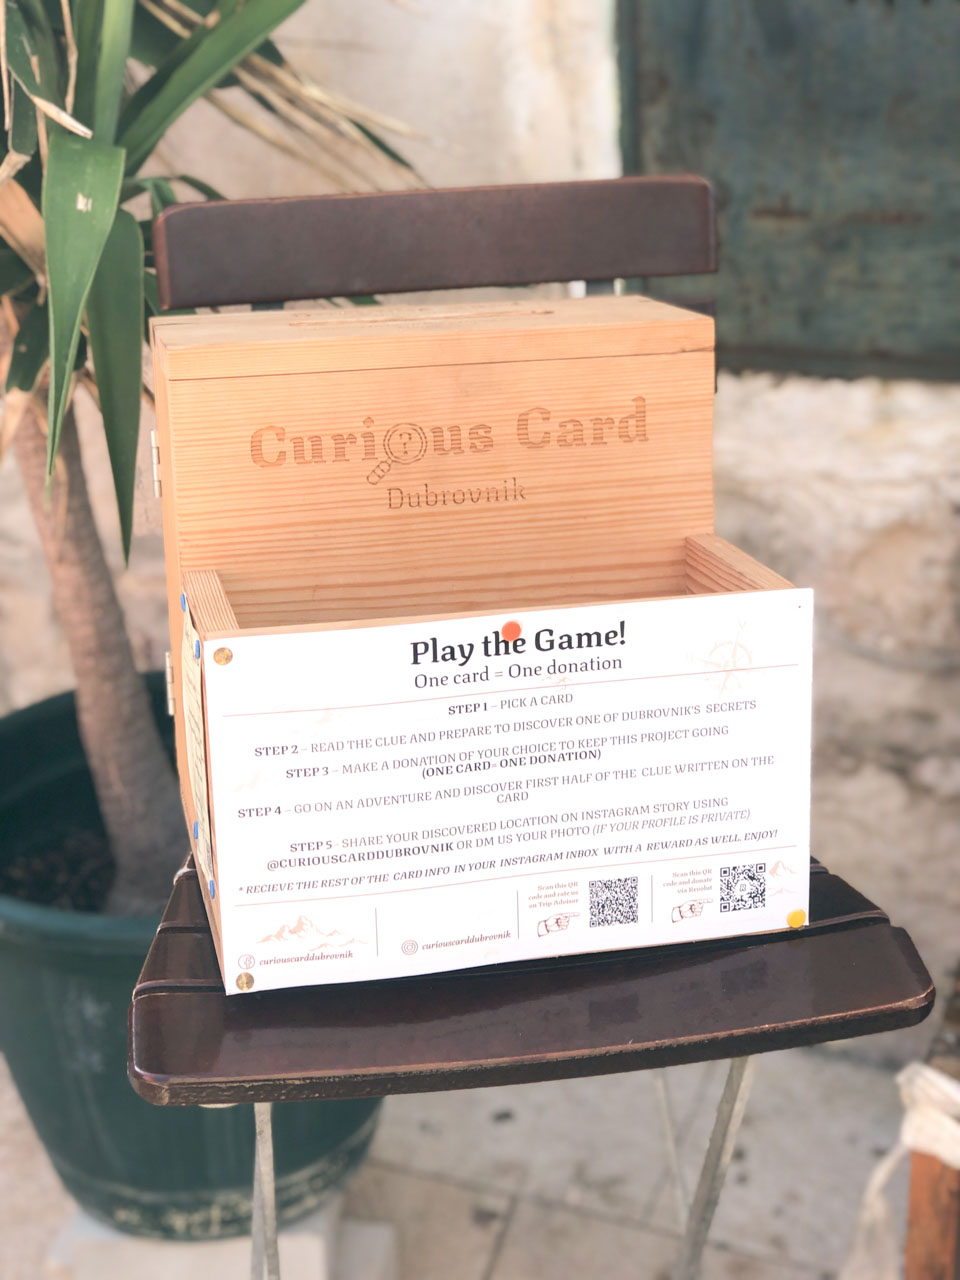 Curious Card game box in Dubrovnik Old Town